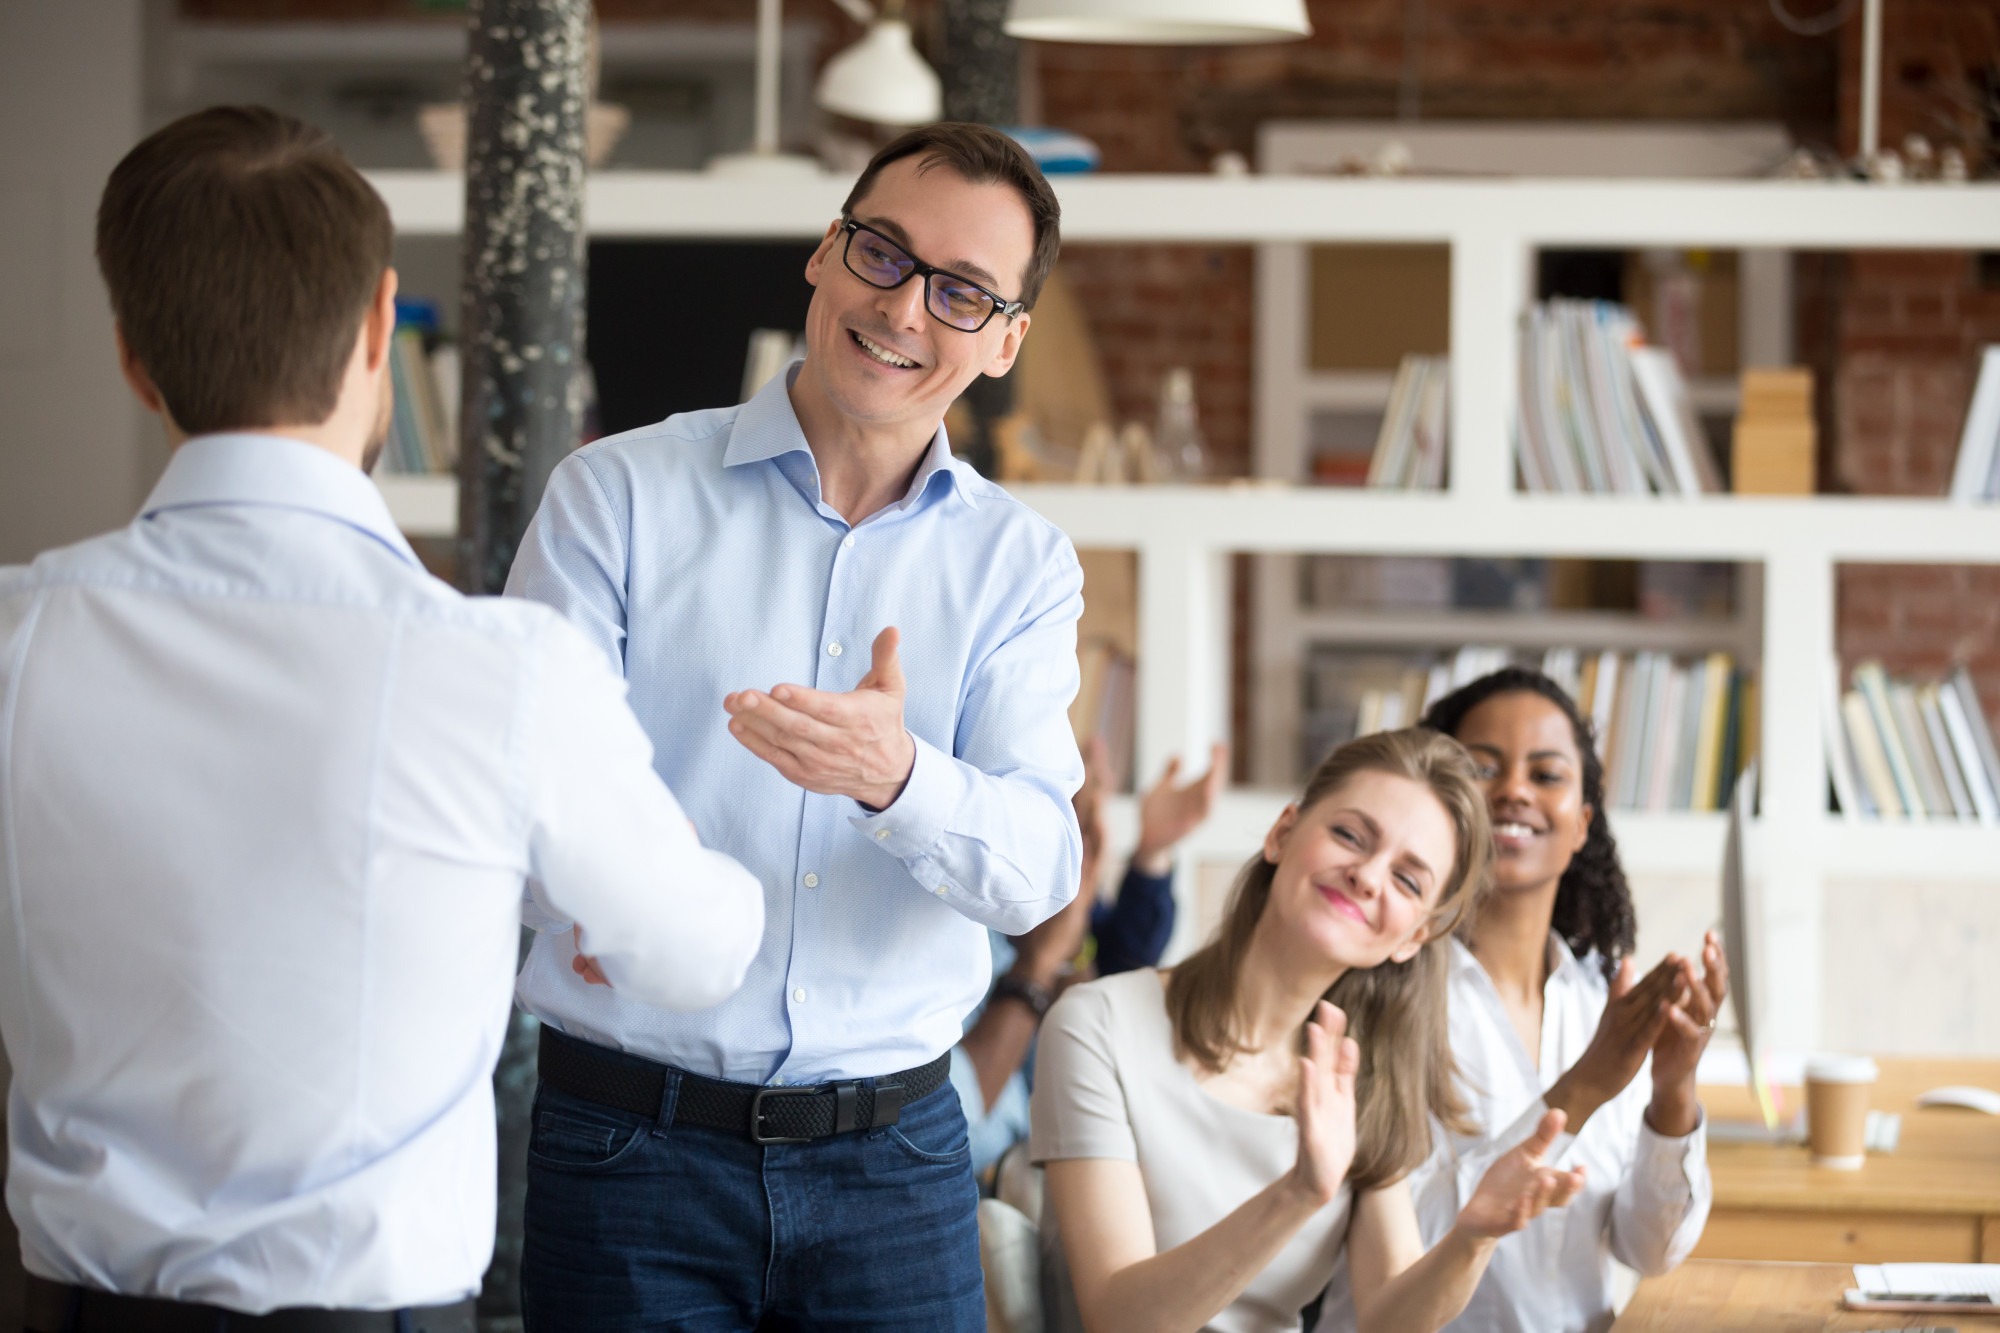 7 Things Your Business Should Do to Welcome New Hires